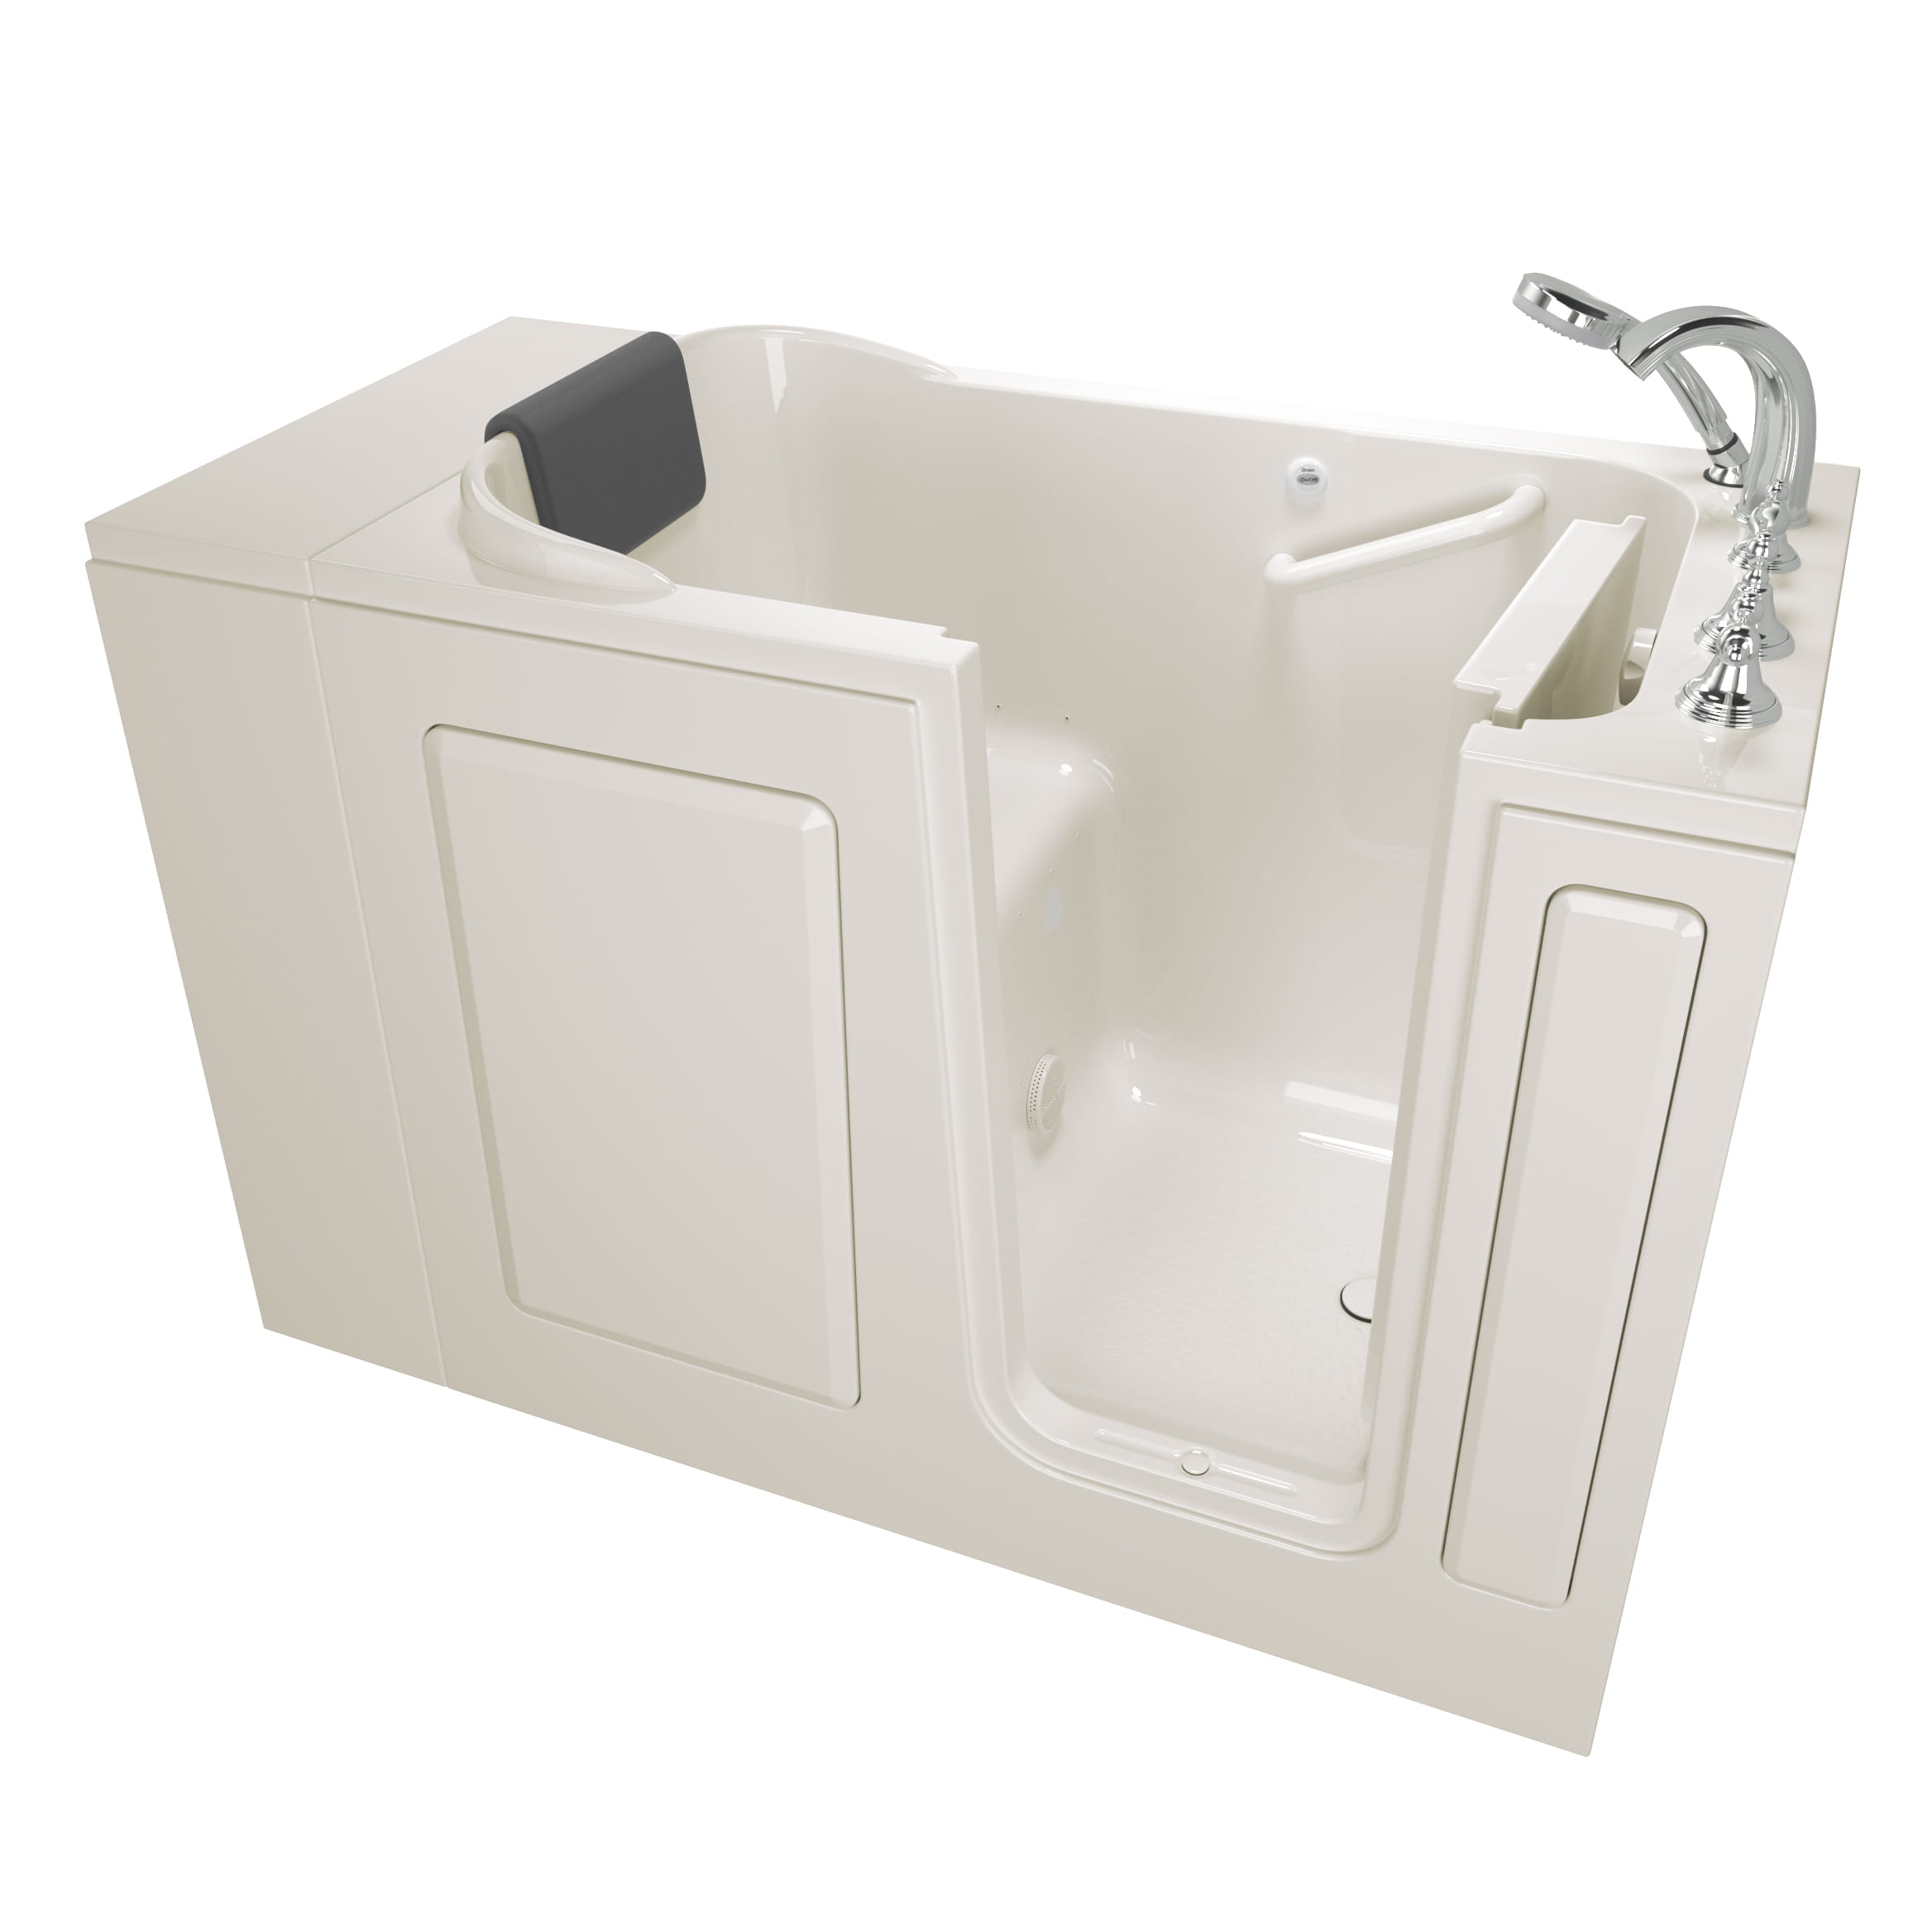 Gelcoat Premium Series 28 x 48-Inch Walk-in Tub With Soaker System - Right-Hand Drain With Faucet